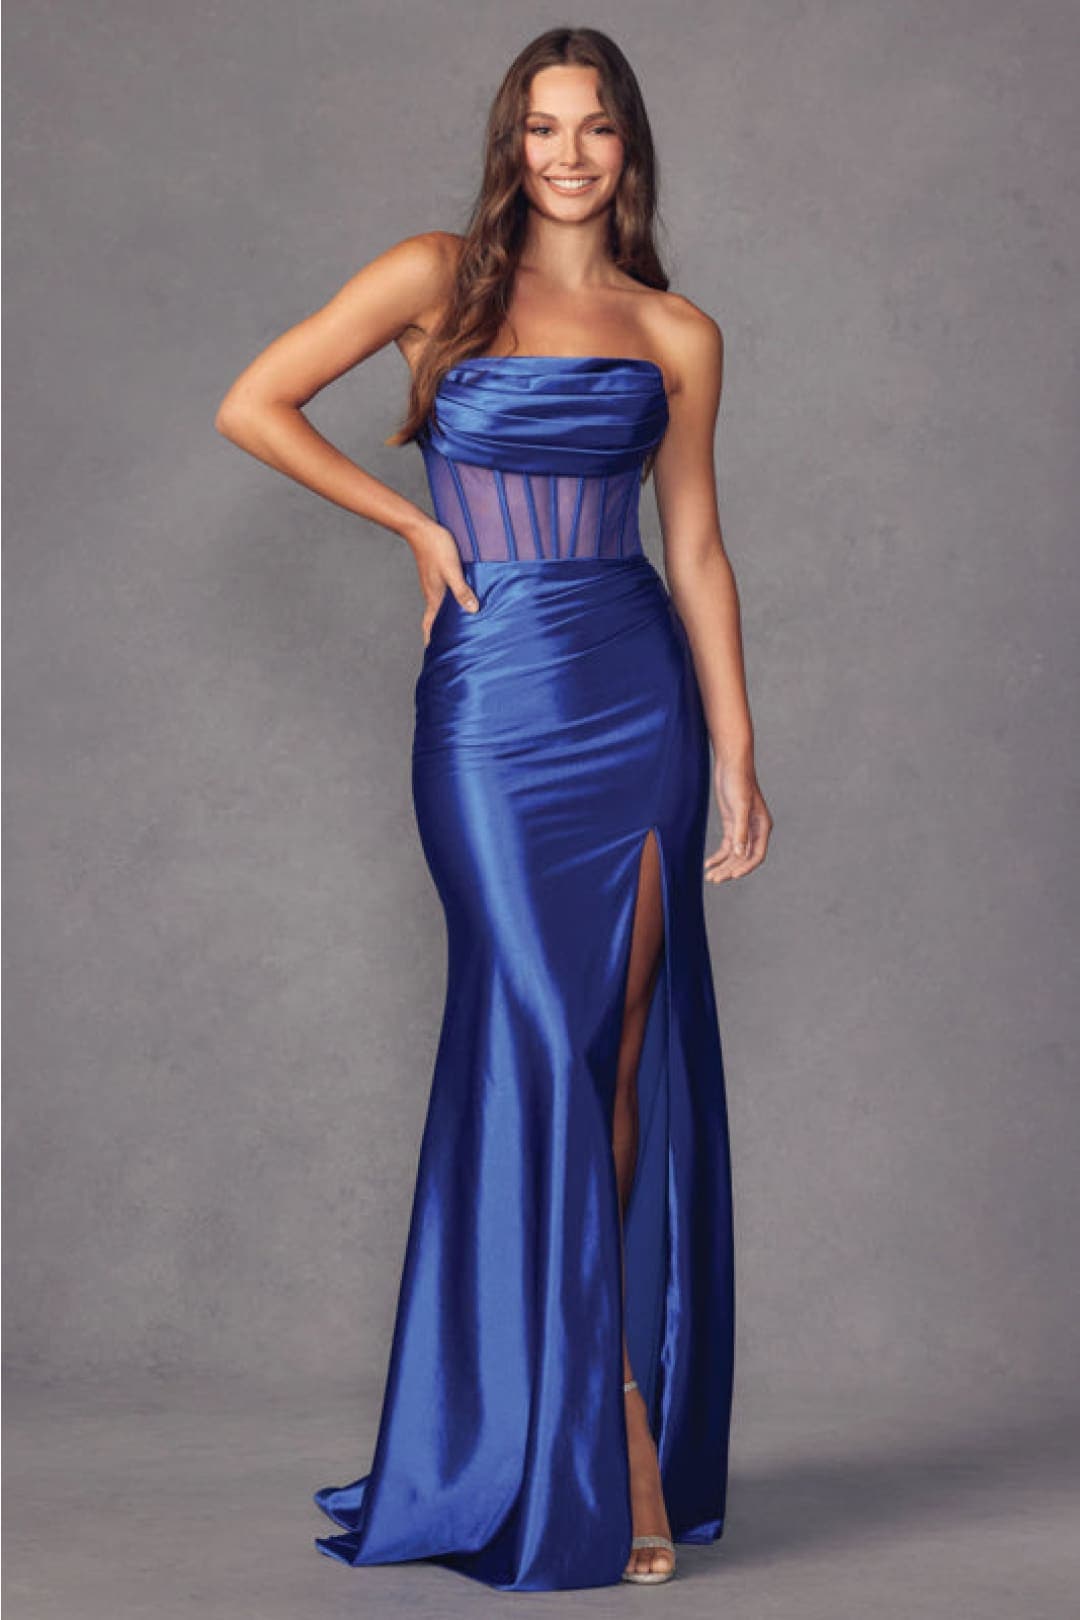 Juliet 2416 Sheer bodice Cowl neck Strapless Simple Bridesmaids Gown - ROYAL BLUE / XS